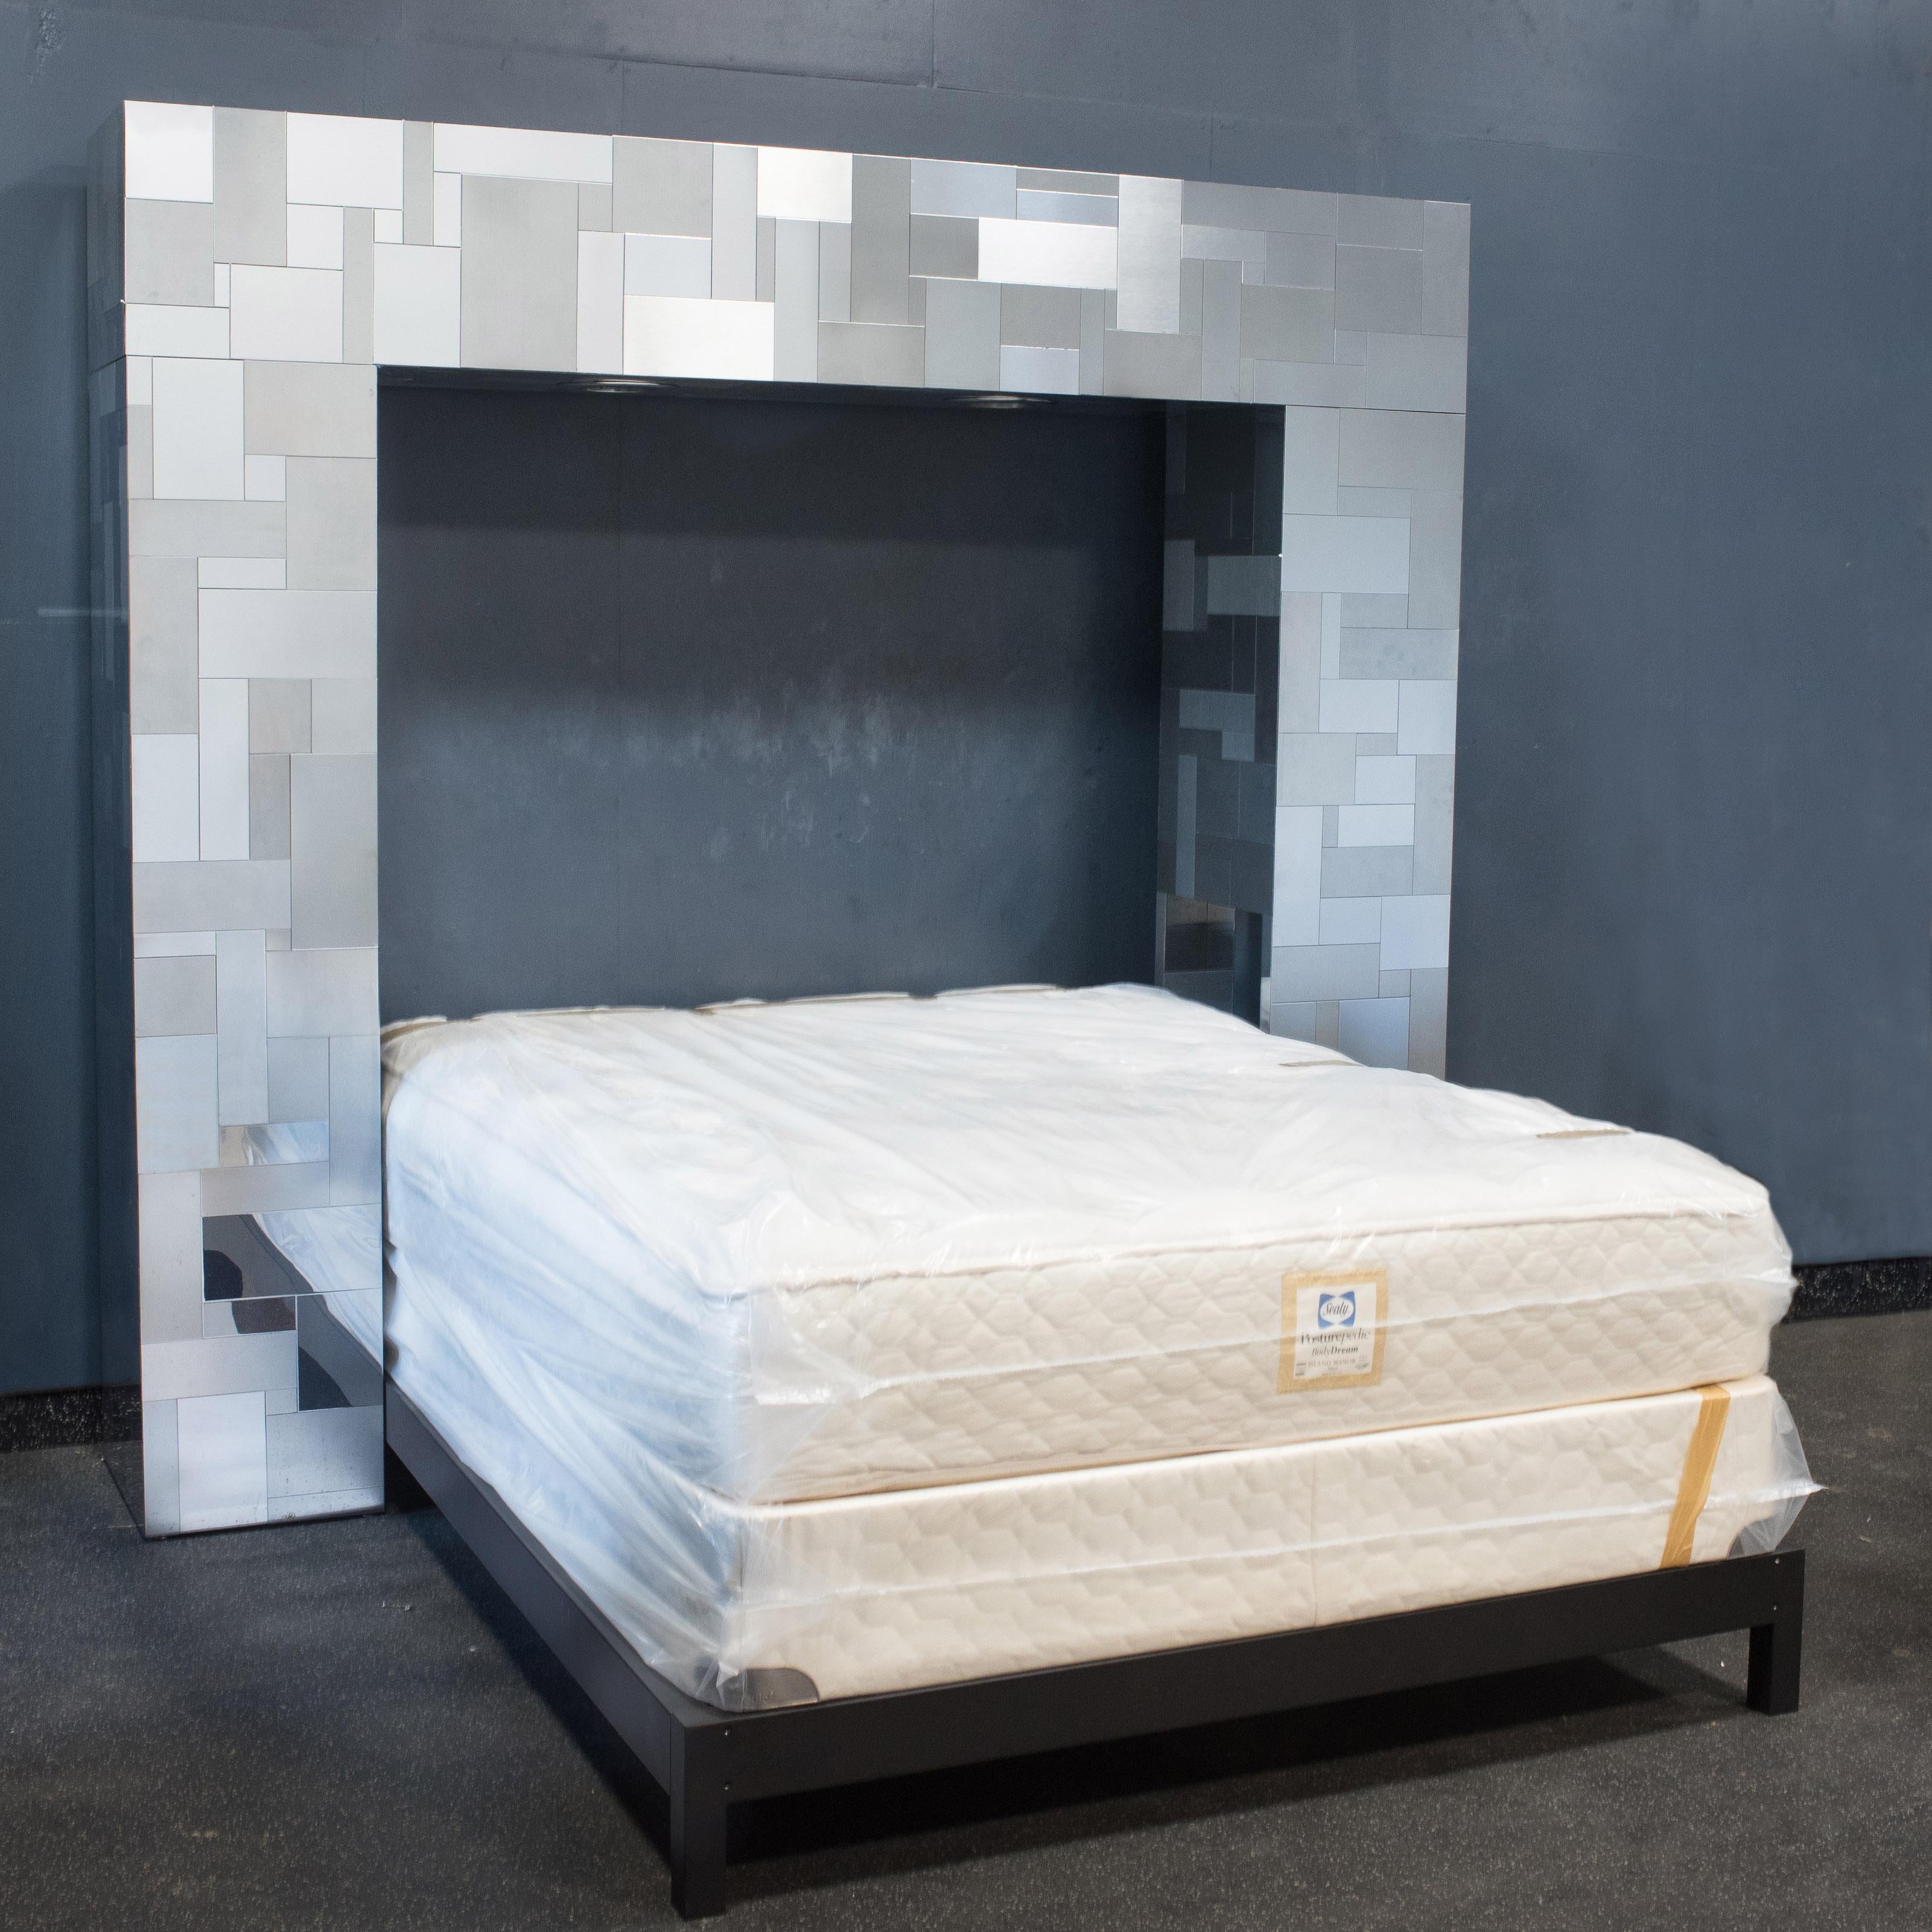 Phenomenal iconic design by Paul Evans is exemplified in this brushed and shiny chrome patchwork cityscape queen sized headboard. On the inside periphery of the headboard there are two cubby shelves and a thoughtful opening for an electrical cord.